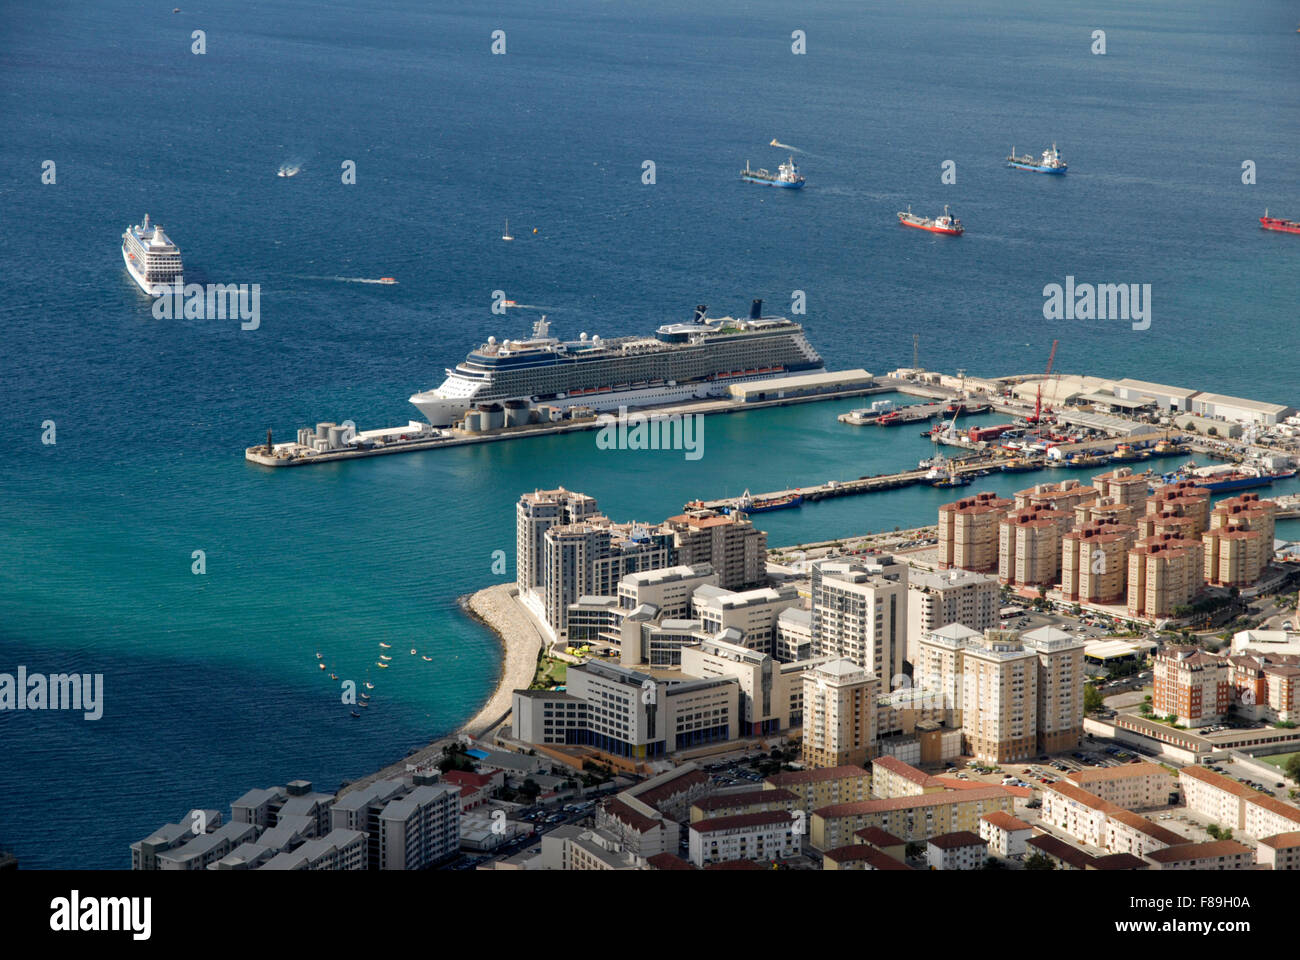 Looking down on new development in Gibraltar with a cruise liner moored in the background. Stock Photo